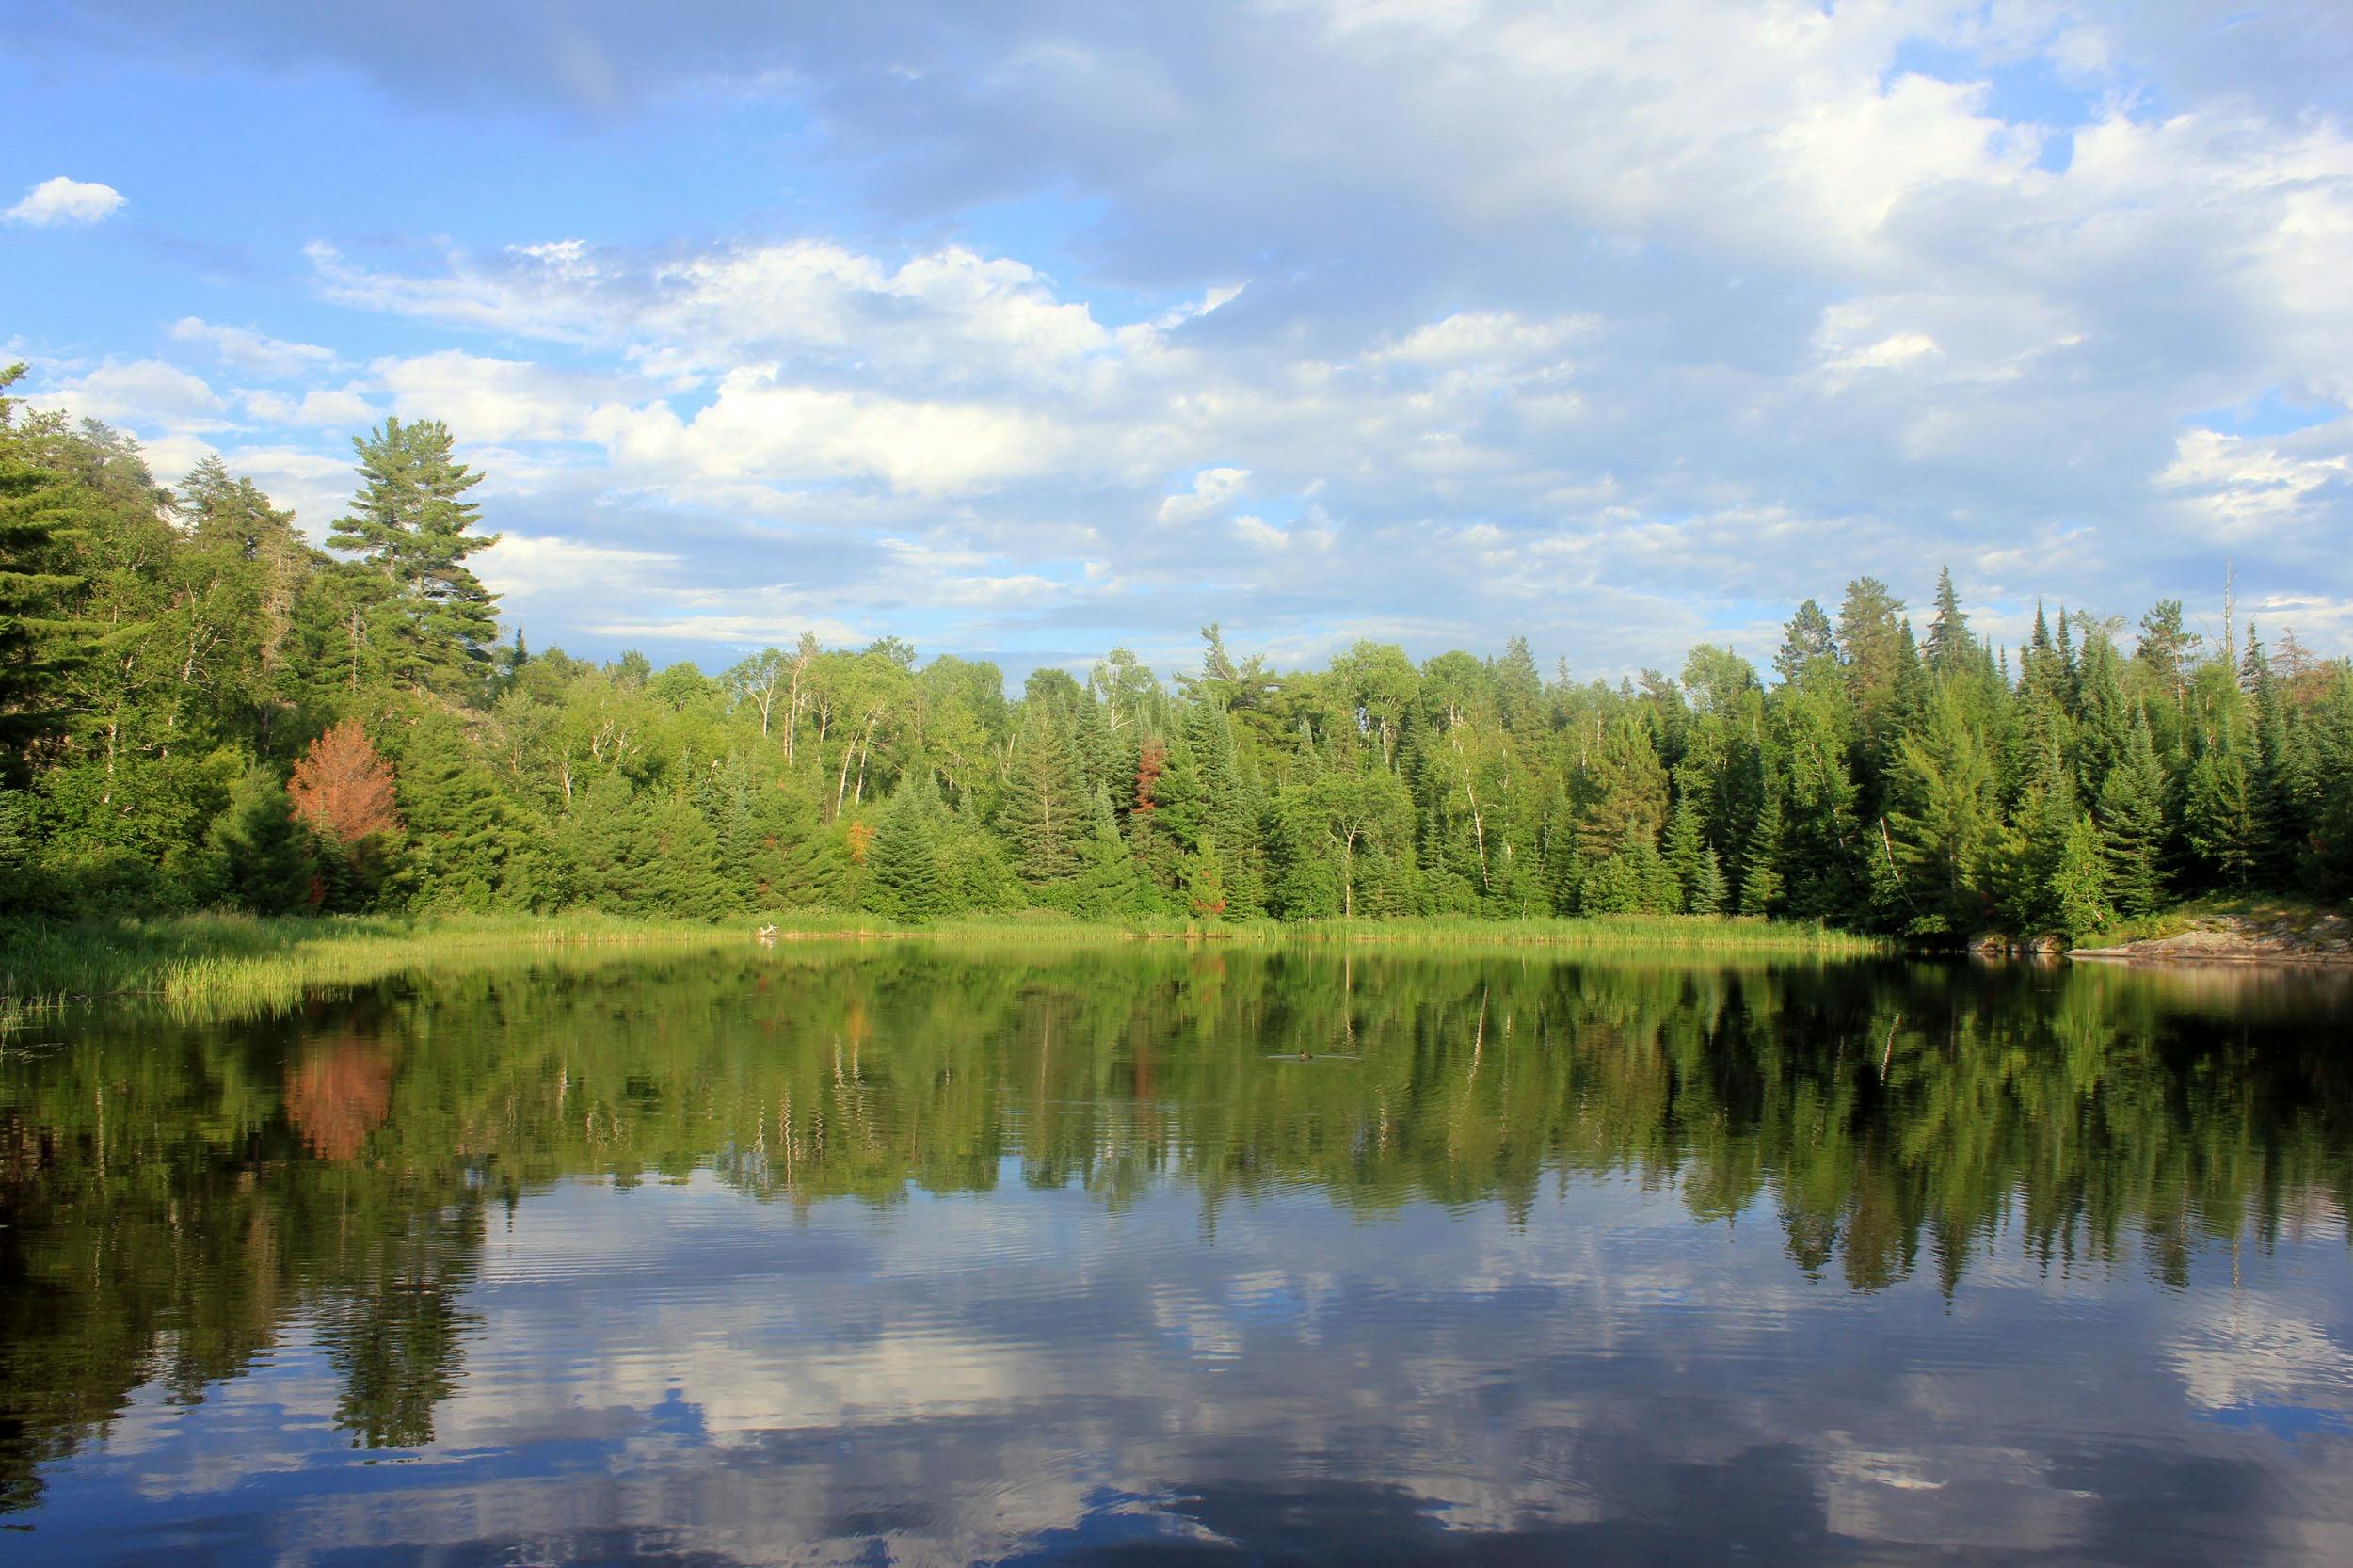 A lake in Voyageurs National Park reflecting the trees on its shore and the blue sky above.